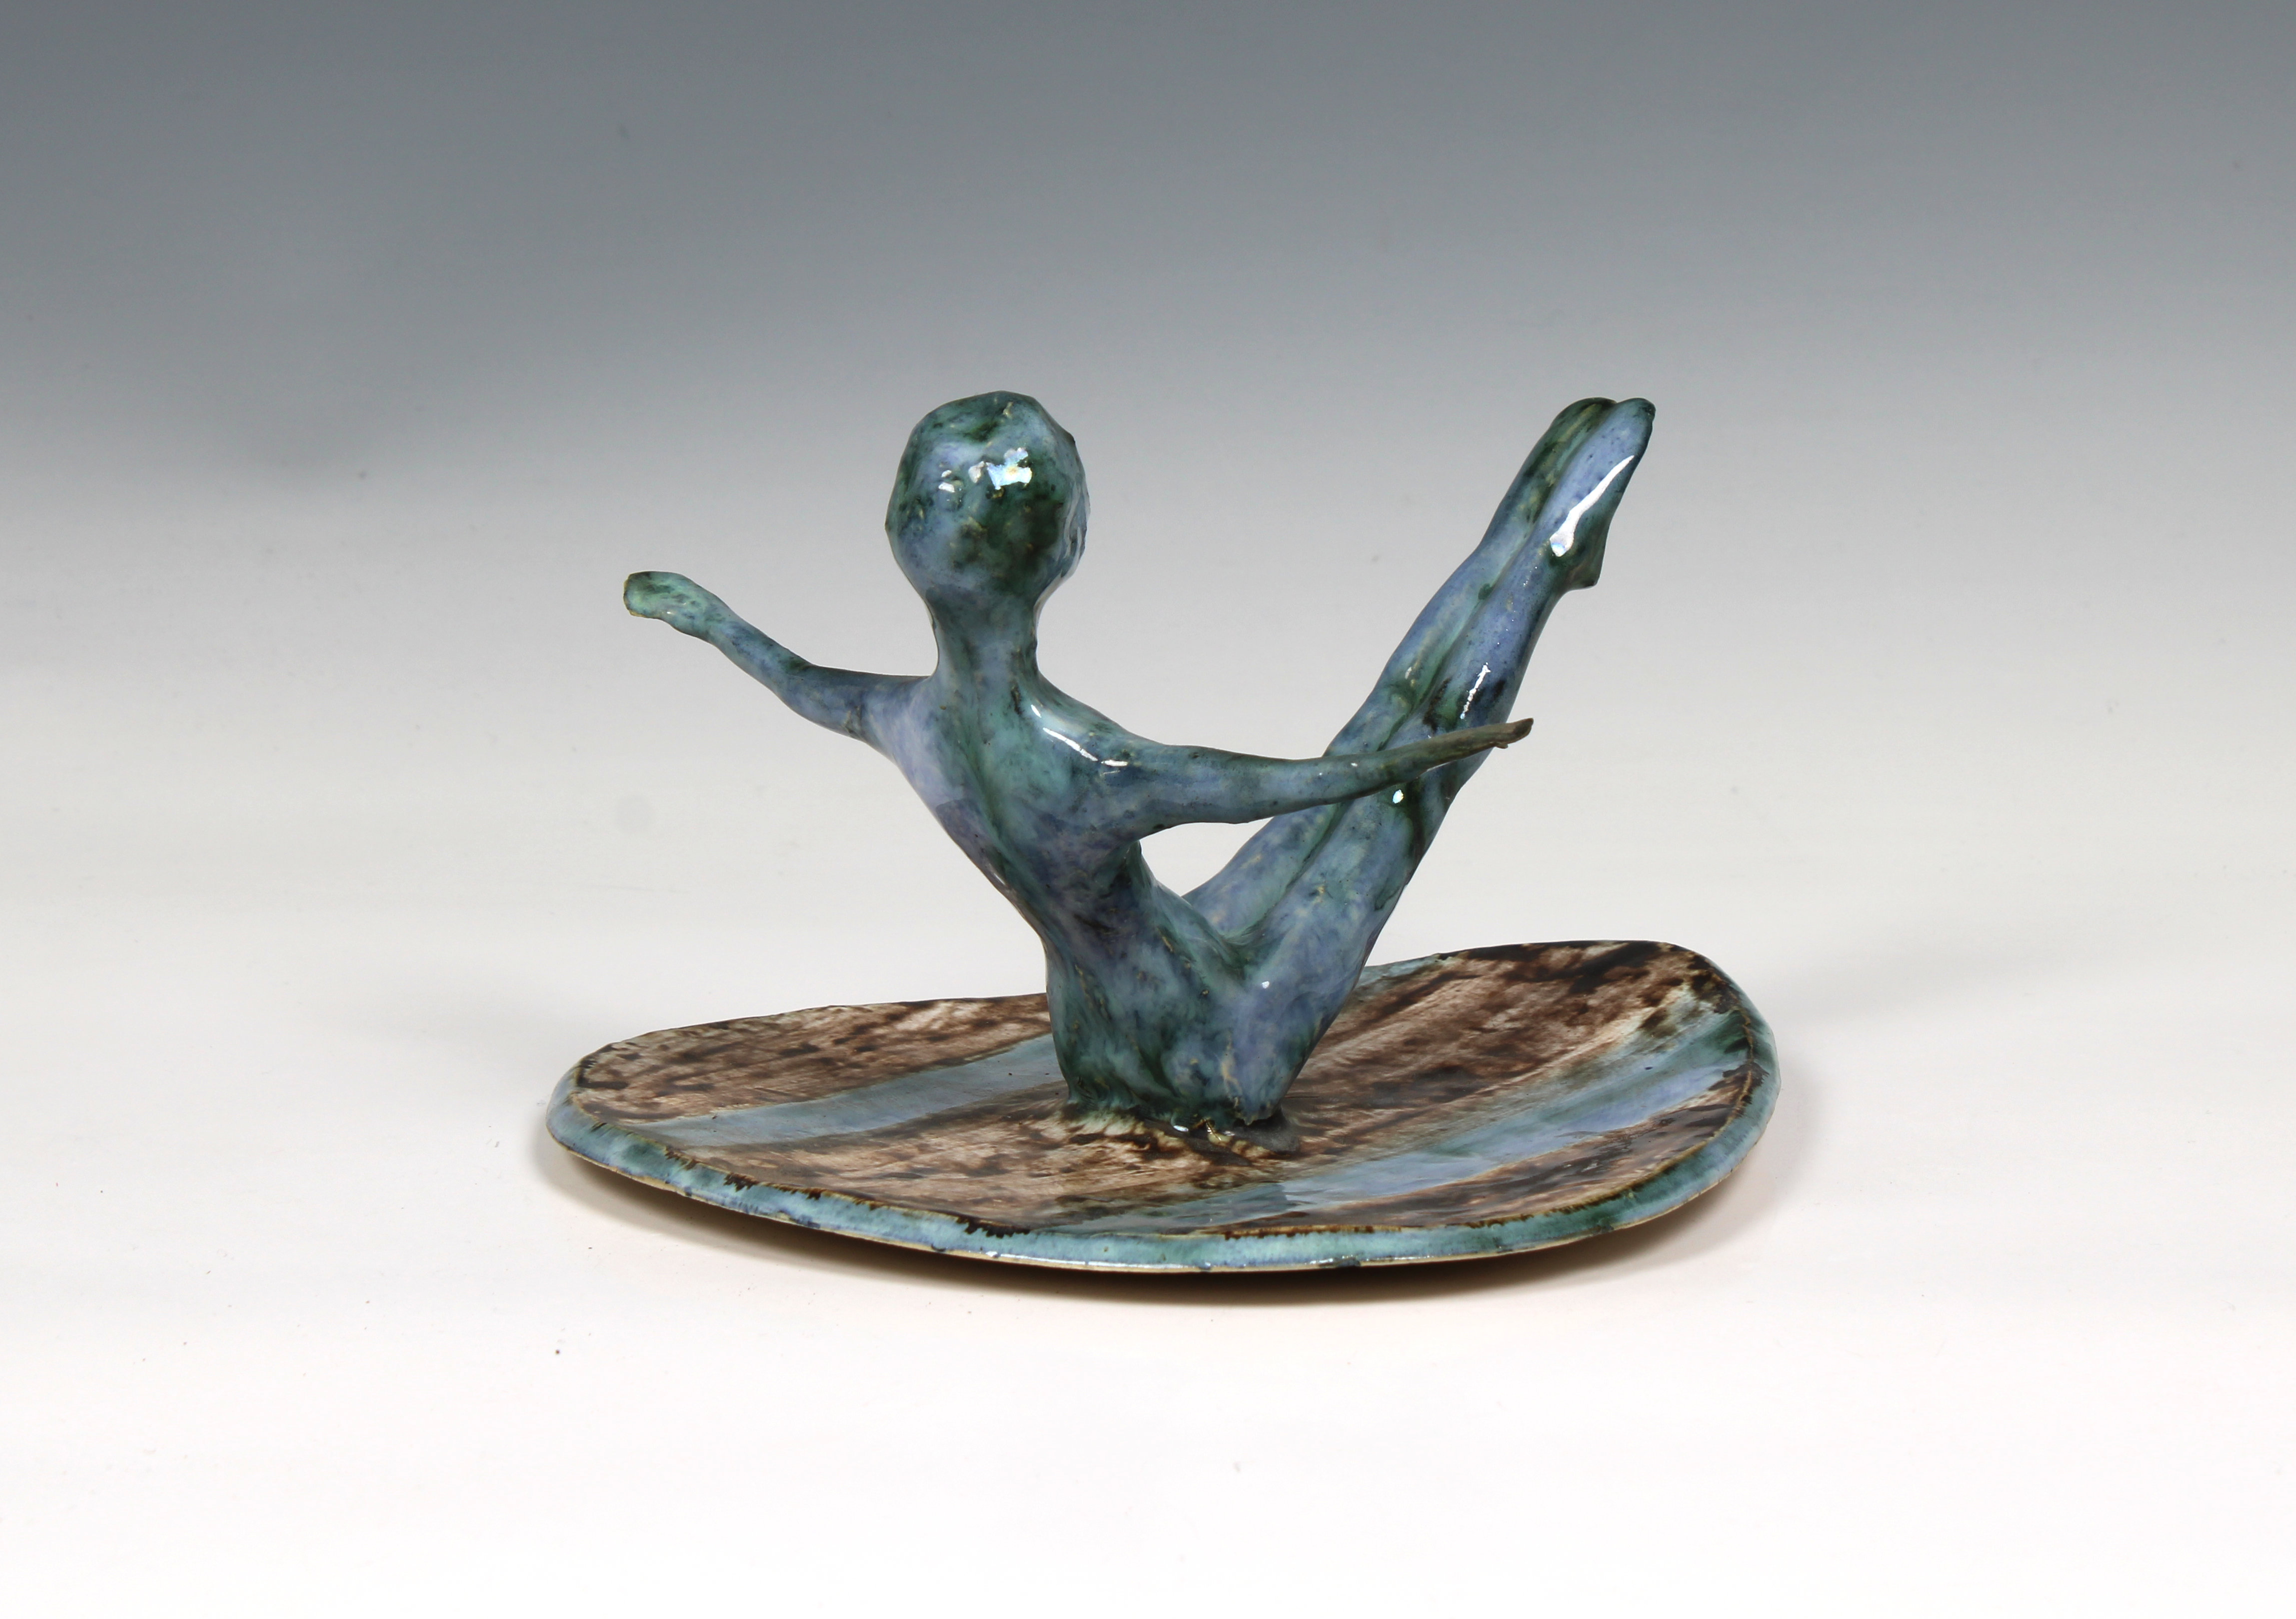 Elizabeth Ann Macphail (1939-89) glazed sculpture featuring a stylised figure doing exercise - Image 2 of 4